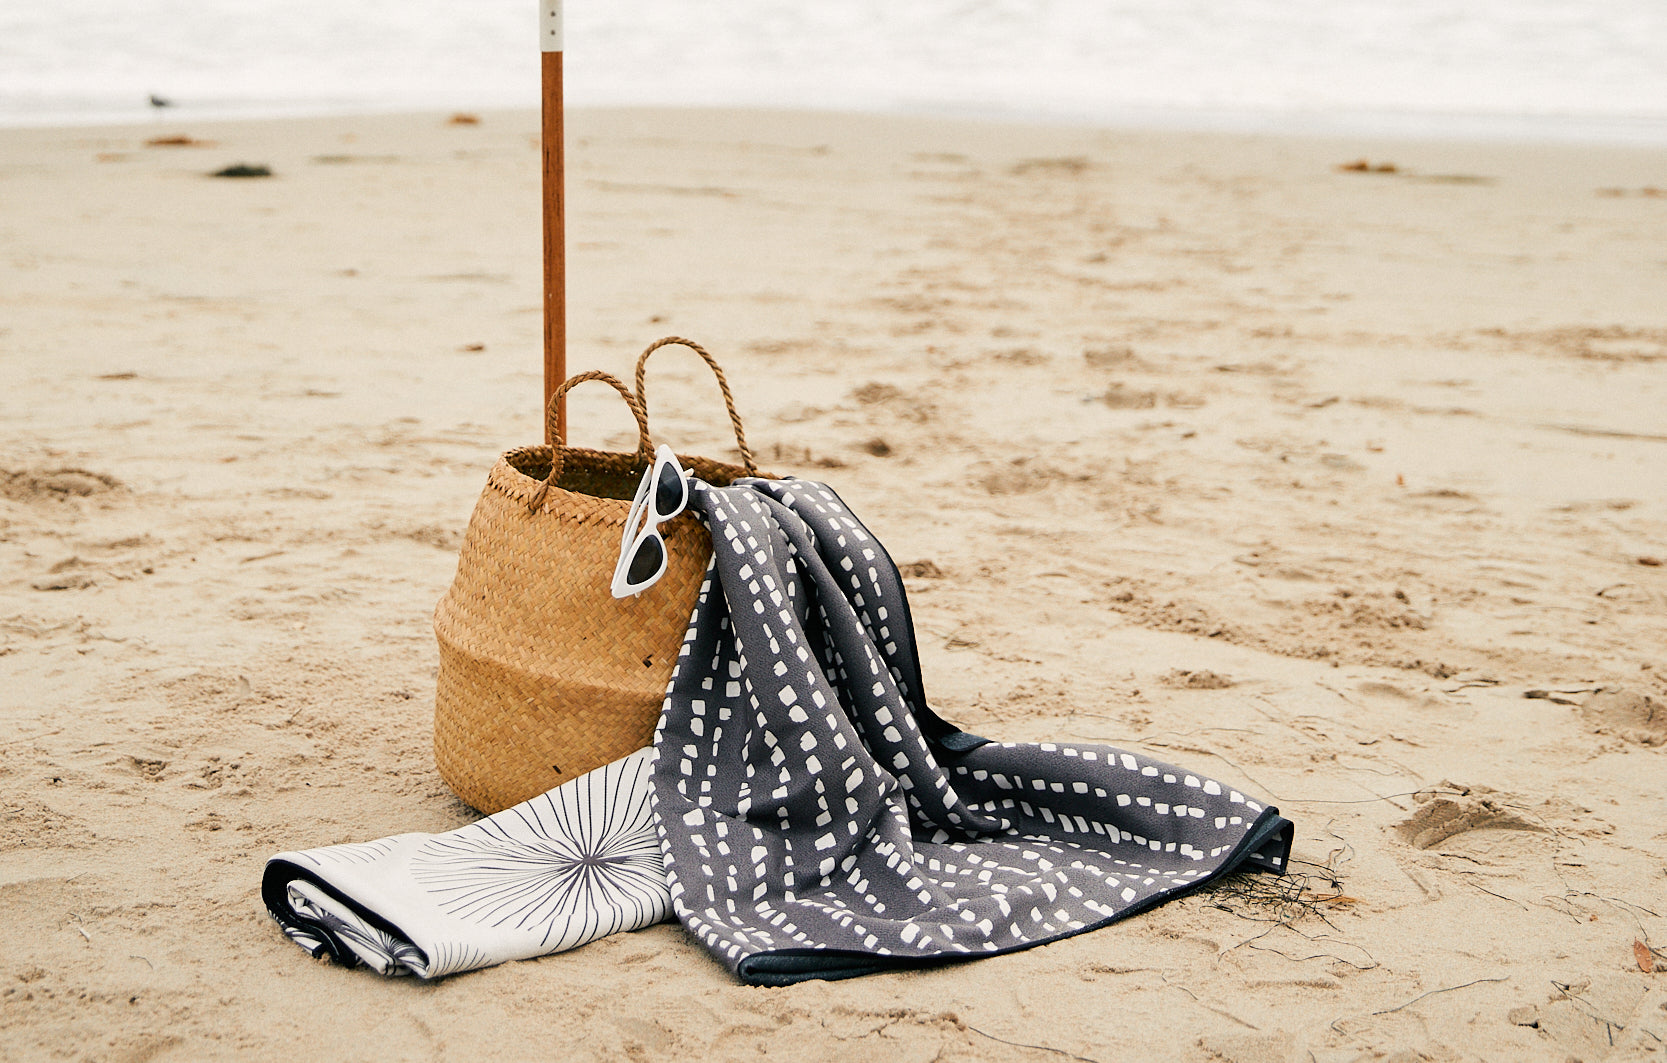 7 Beach Hacks You Didn’t Know You Needed